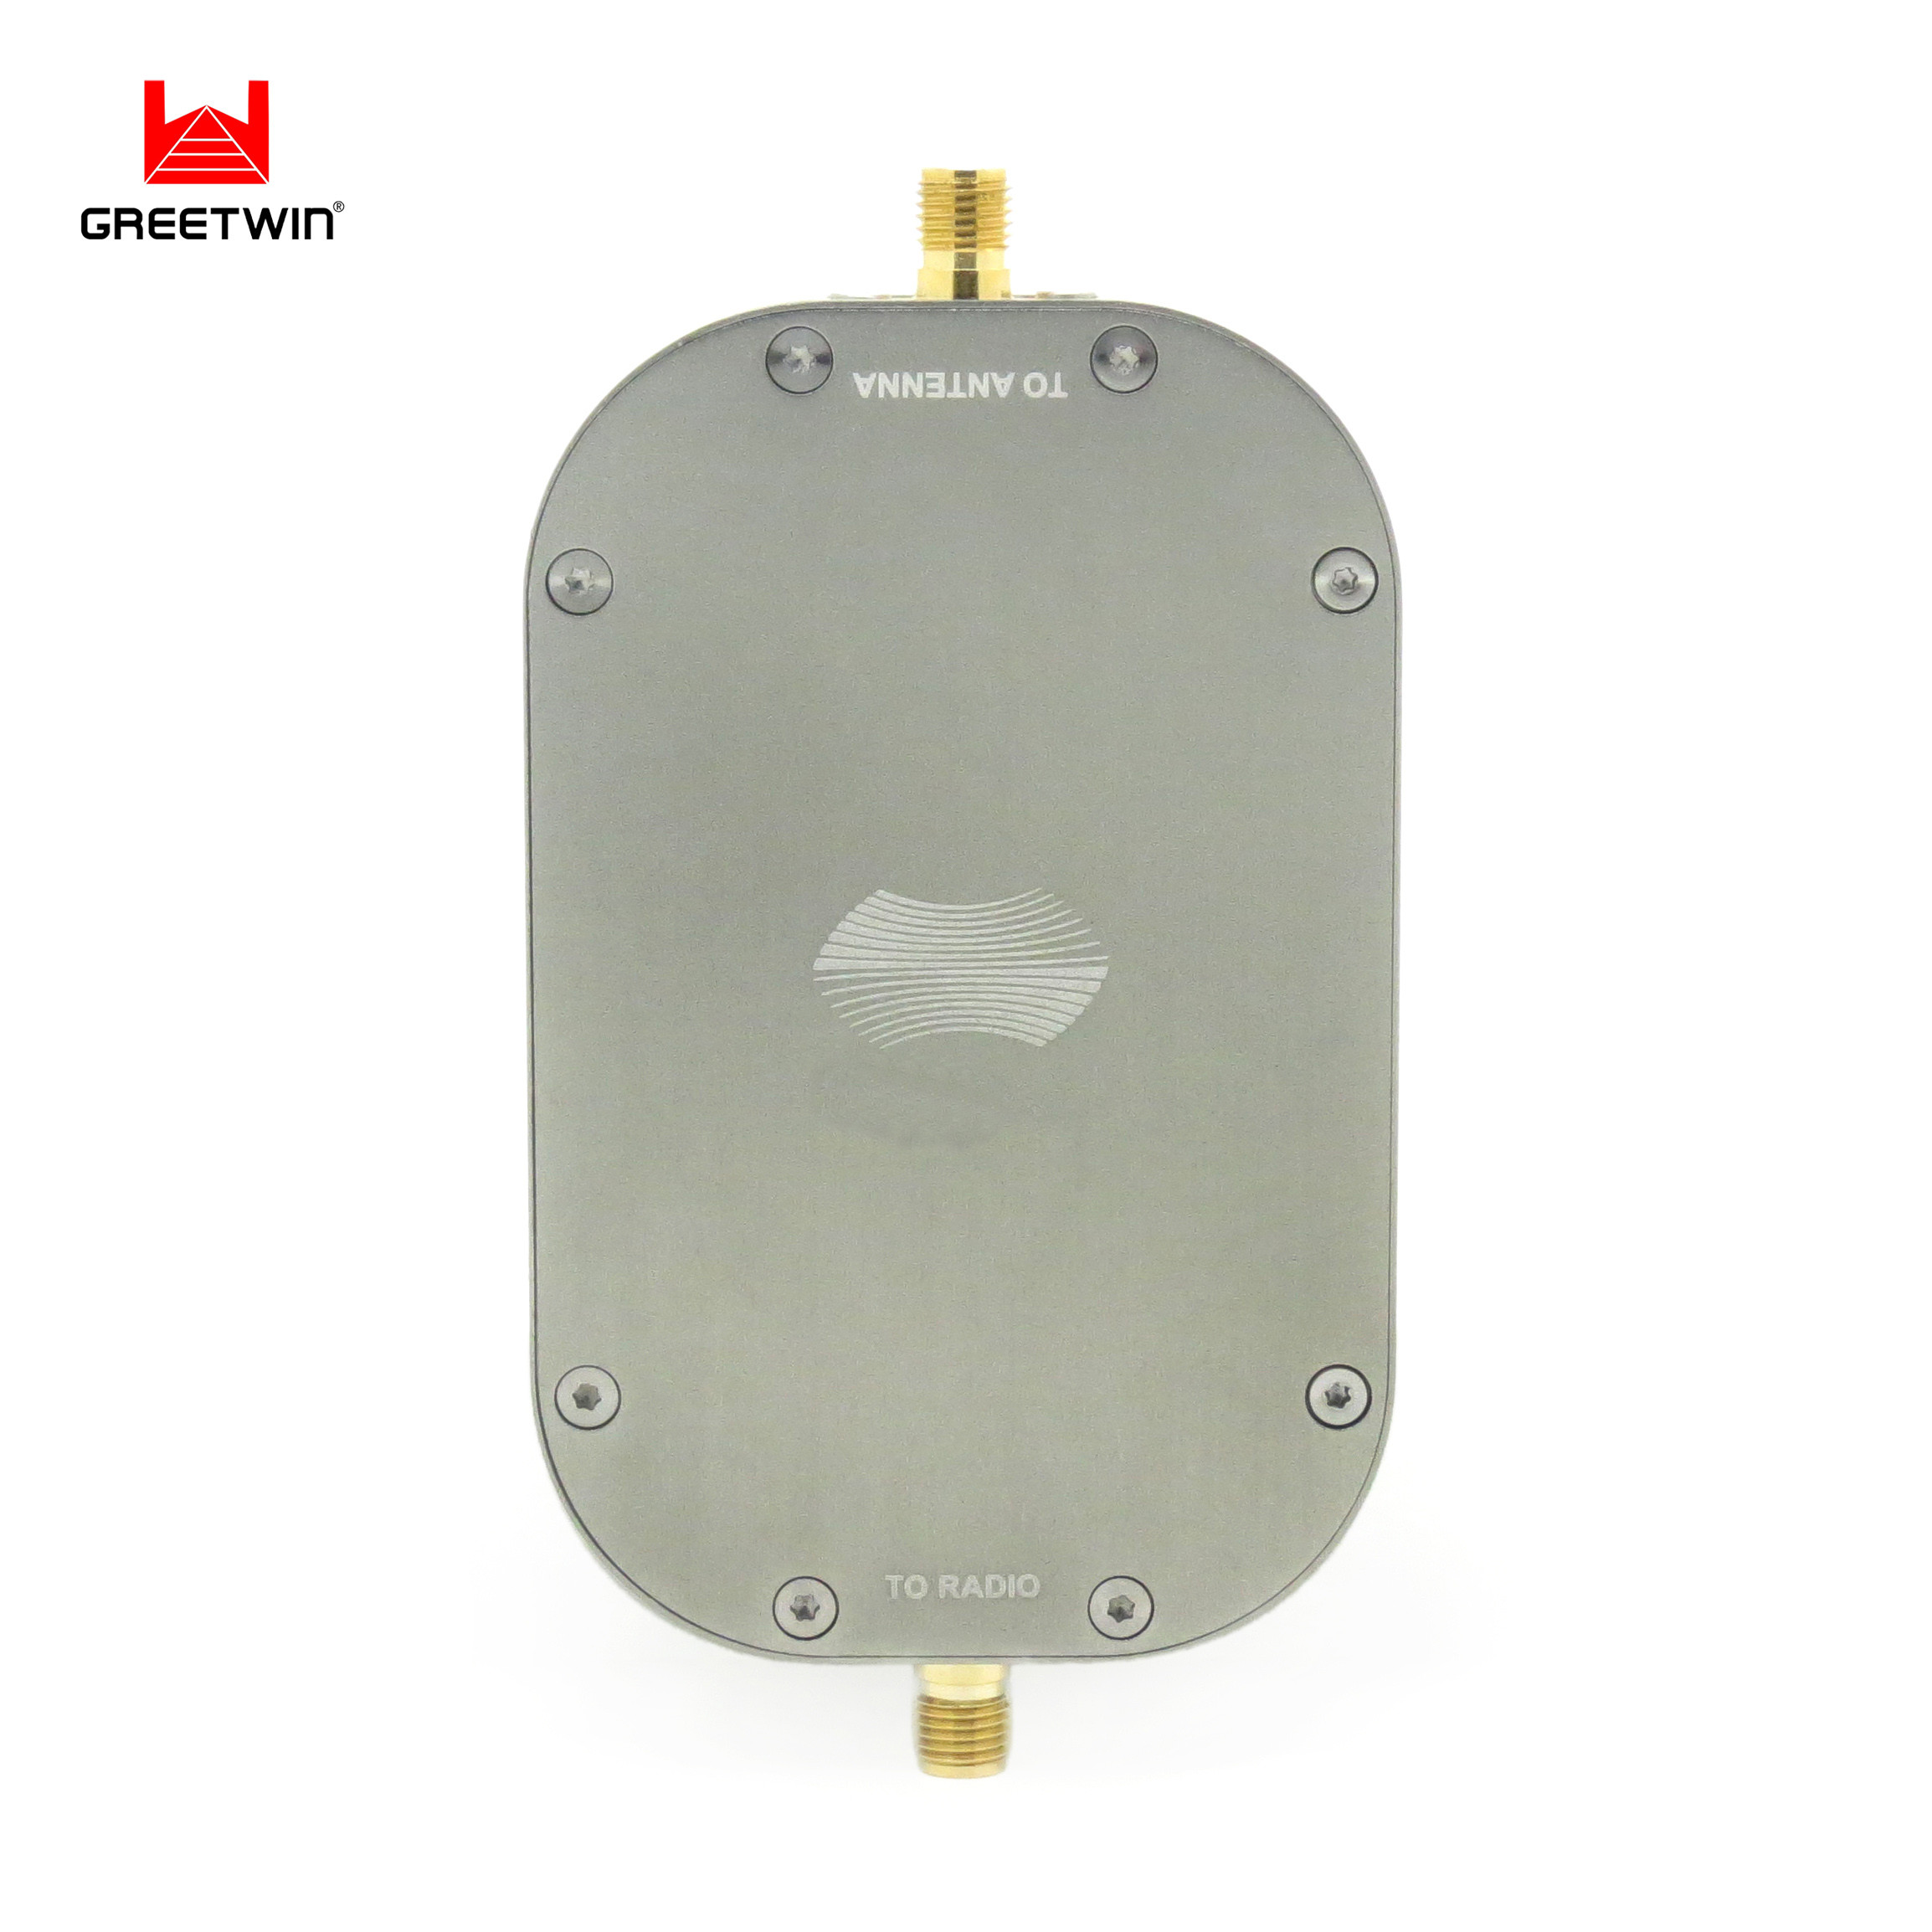 2w 2.4g 5.8g Airplane Wifi Repeater Booster para Uav Drones